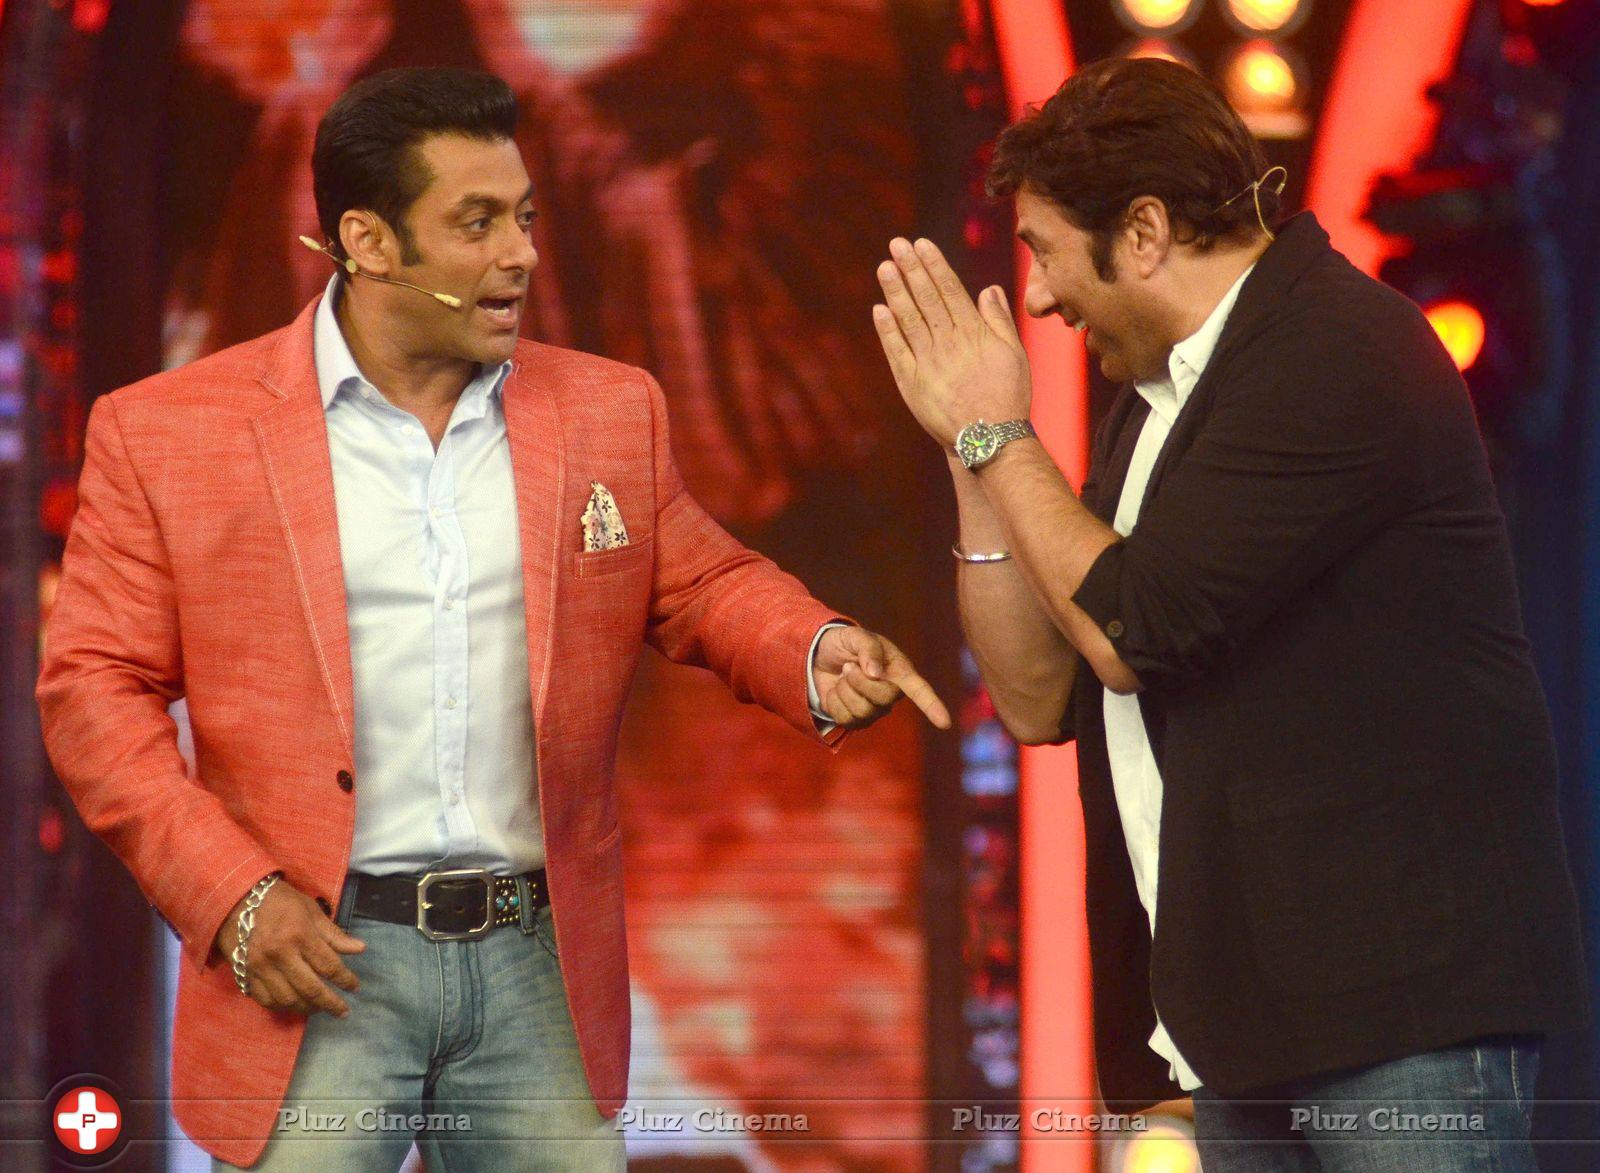 Sunny Deol promotes his film Singh Sahab The Great on the sets of Big Boss With Salman Khan Photos | Picture 633384